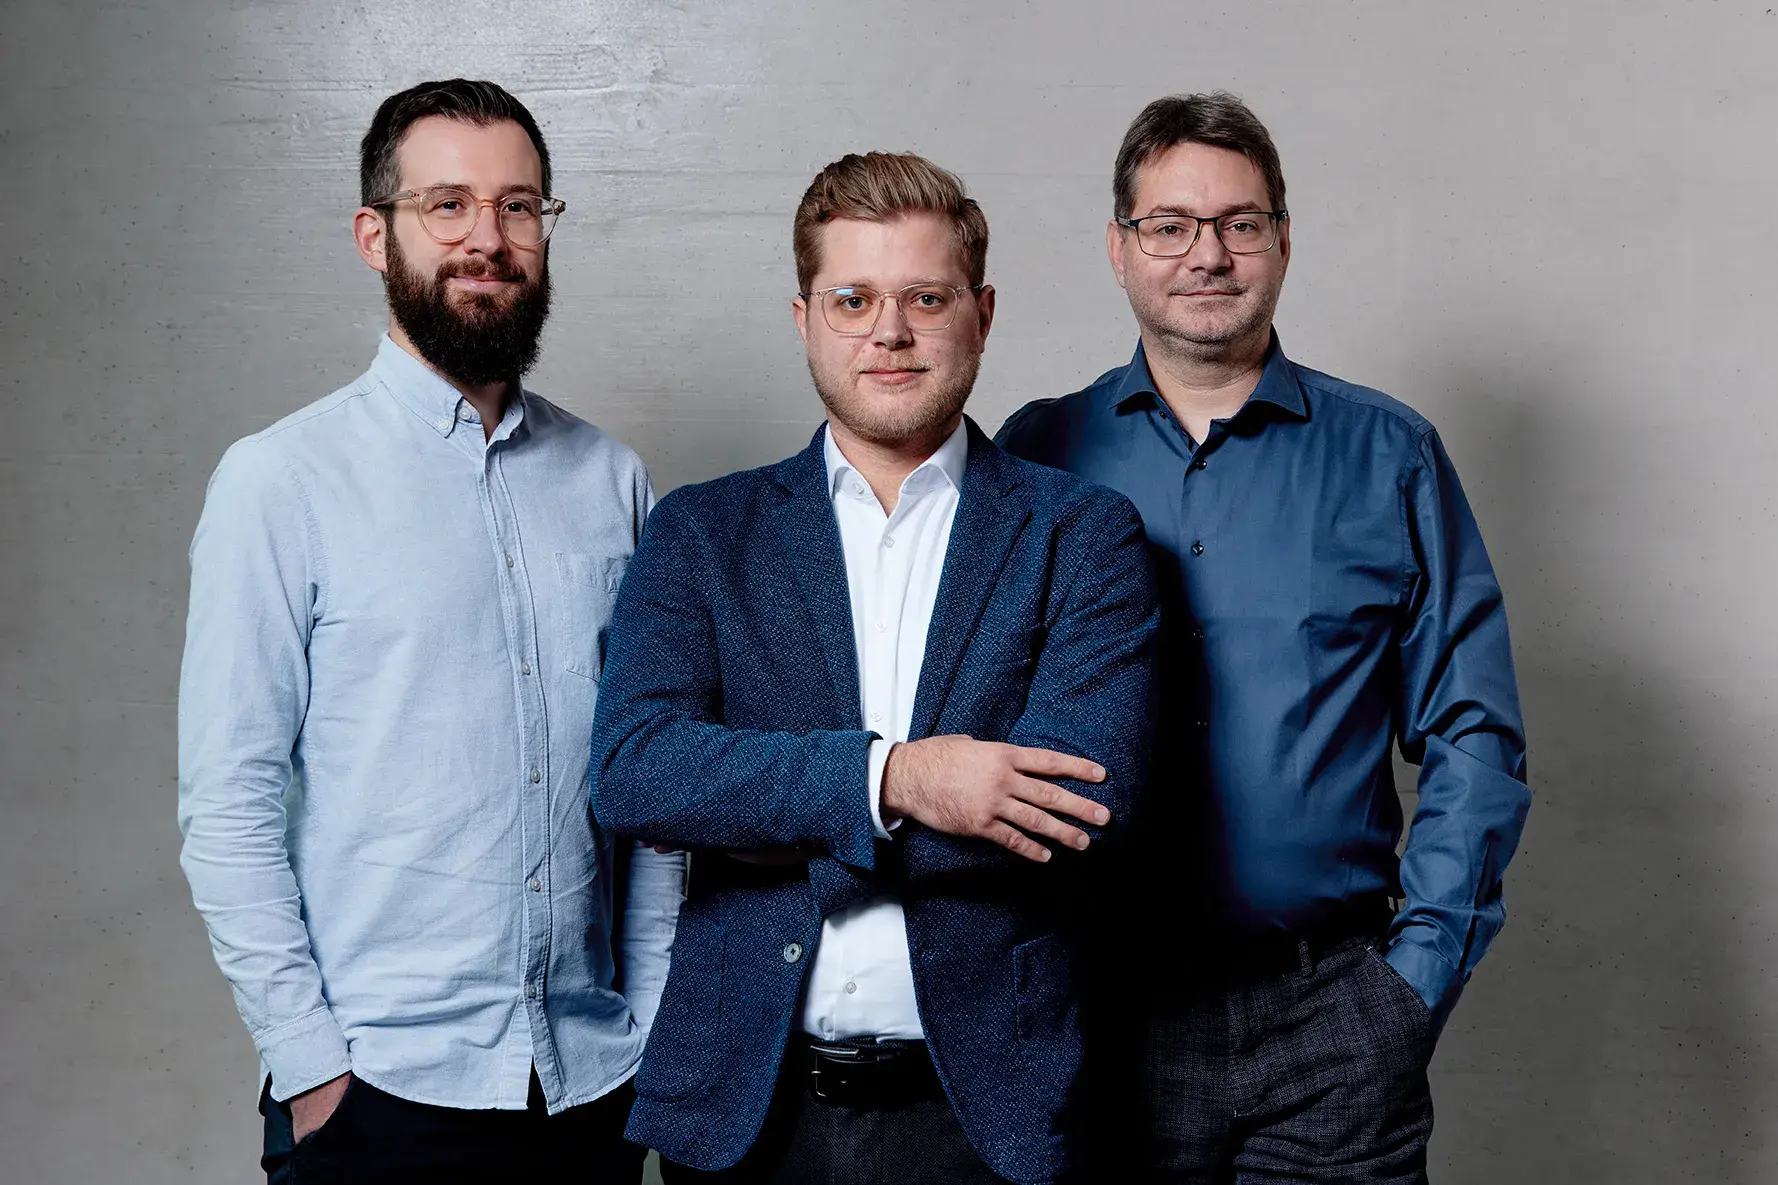 3 C level people of fiskaly, SaaS provider of compliant and cloud-based solutions for fiscalization and e-receipts: Patrick Gaubatz, Johannes Ferner and Simon Tragatschnig